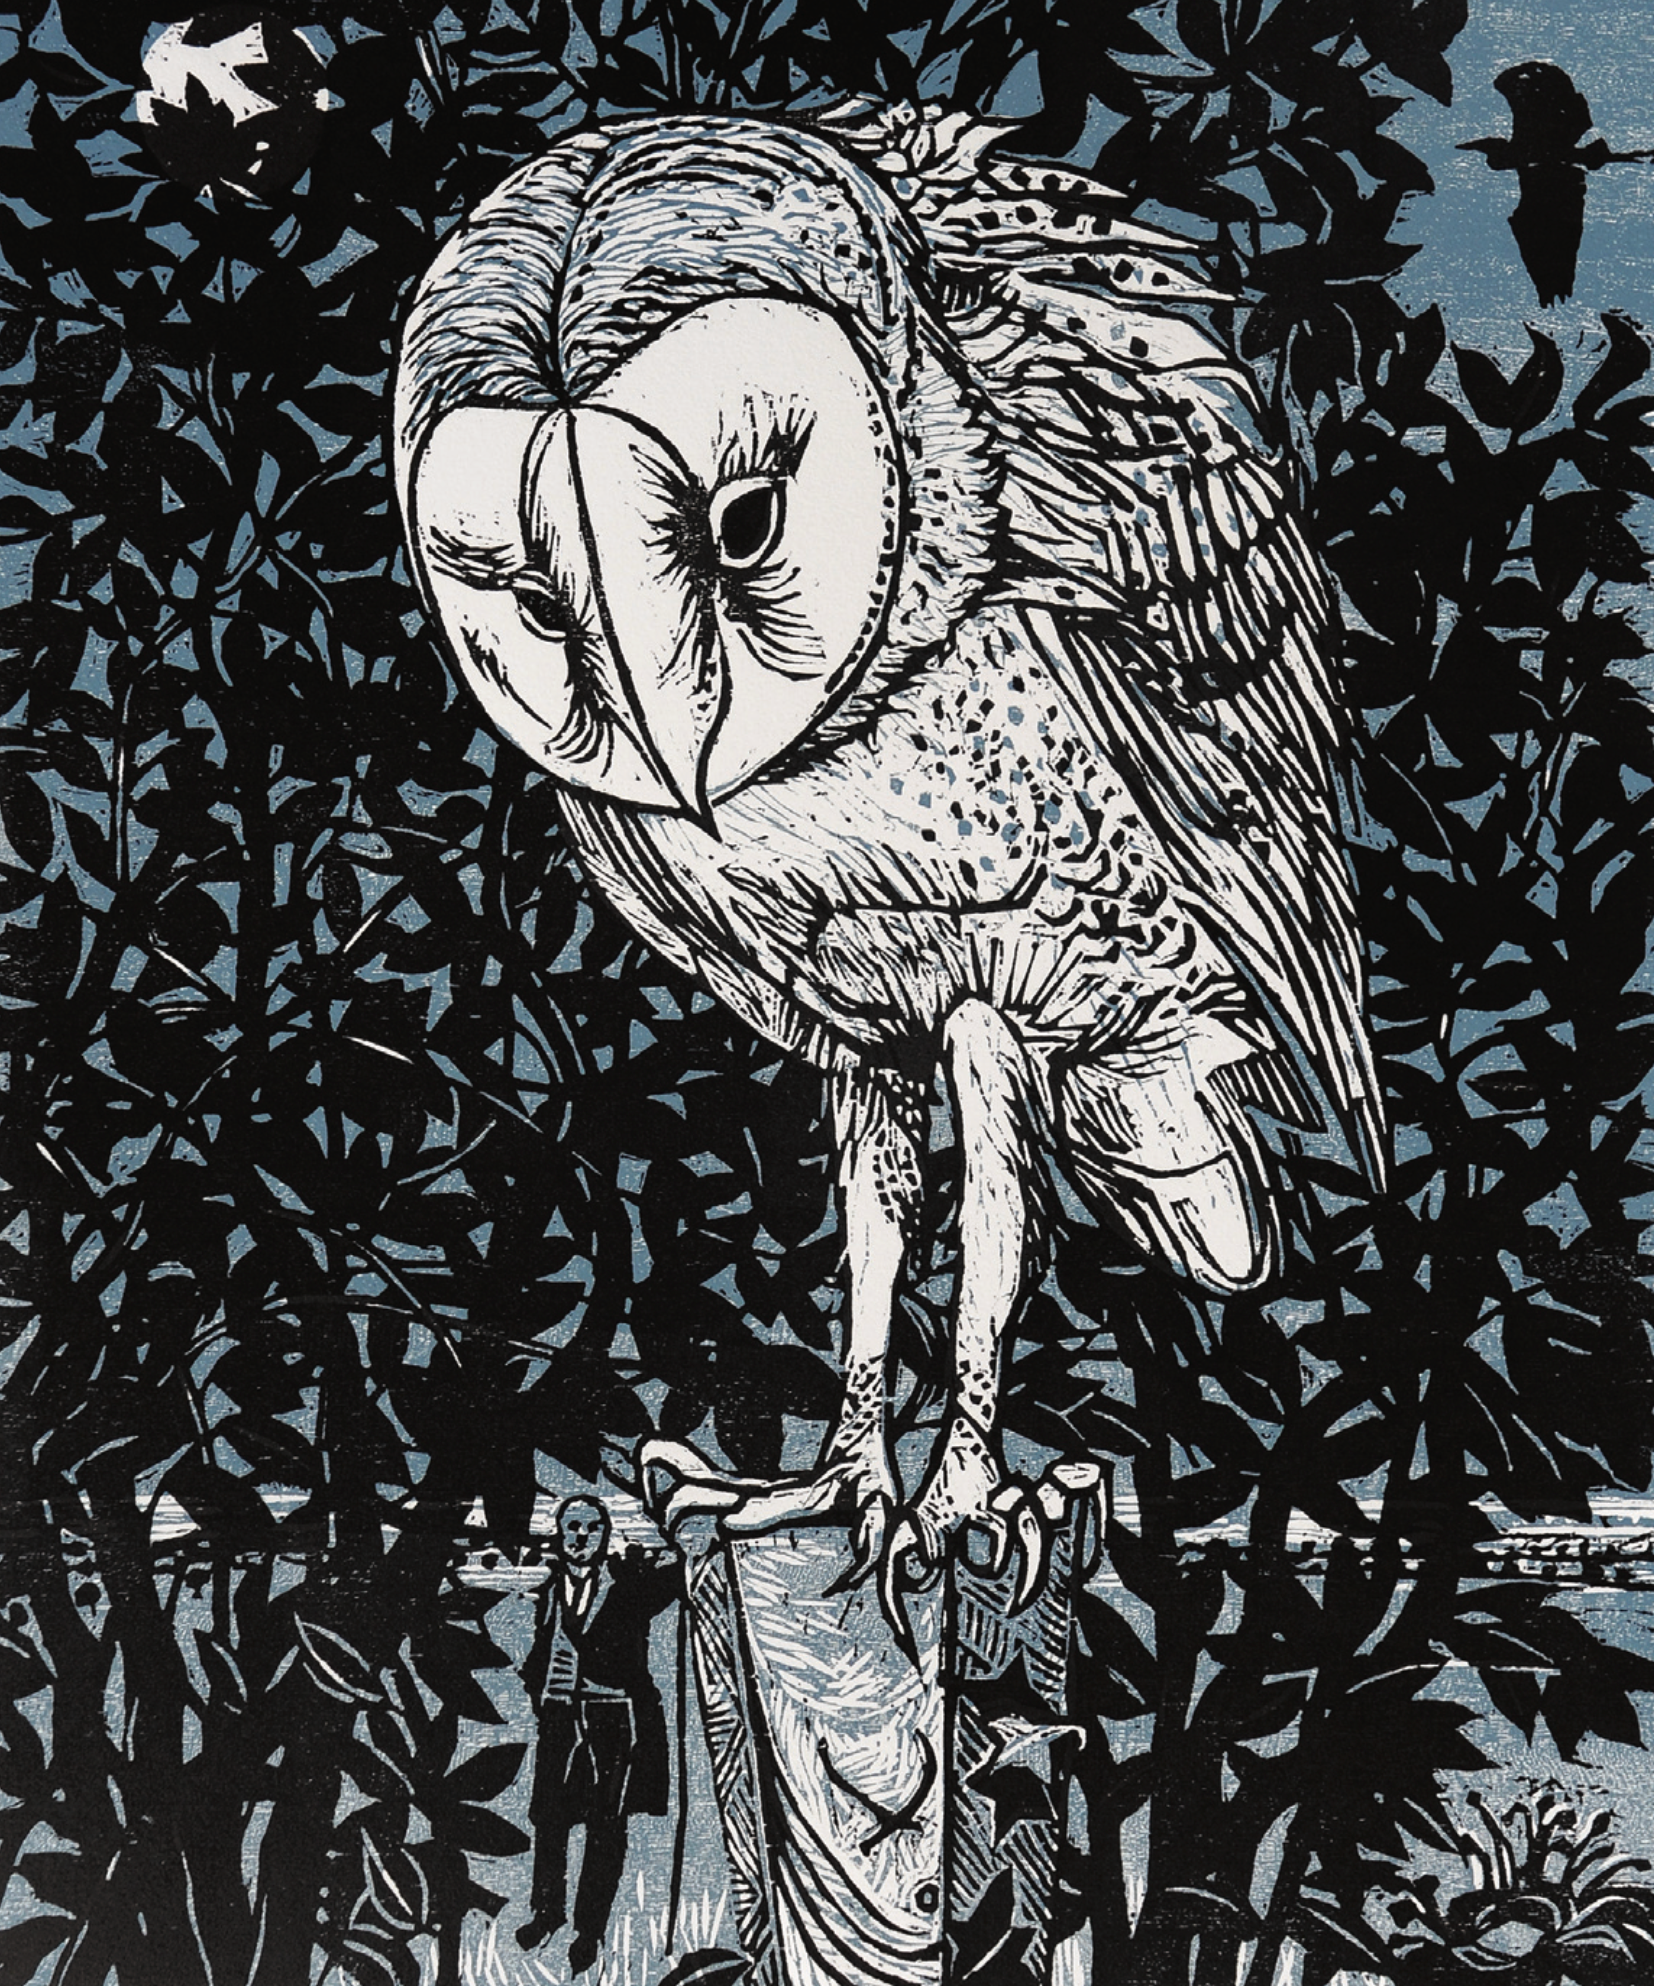 Fred Clare and the Heron, woodcut, ed 70, 1992